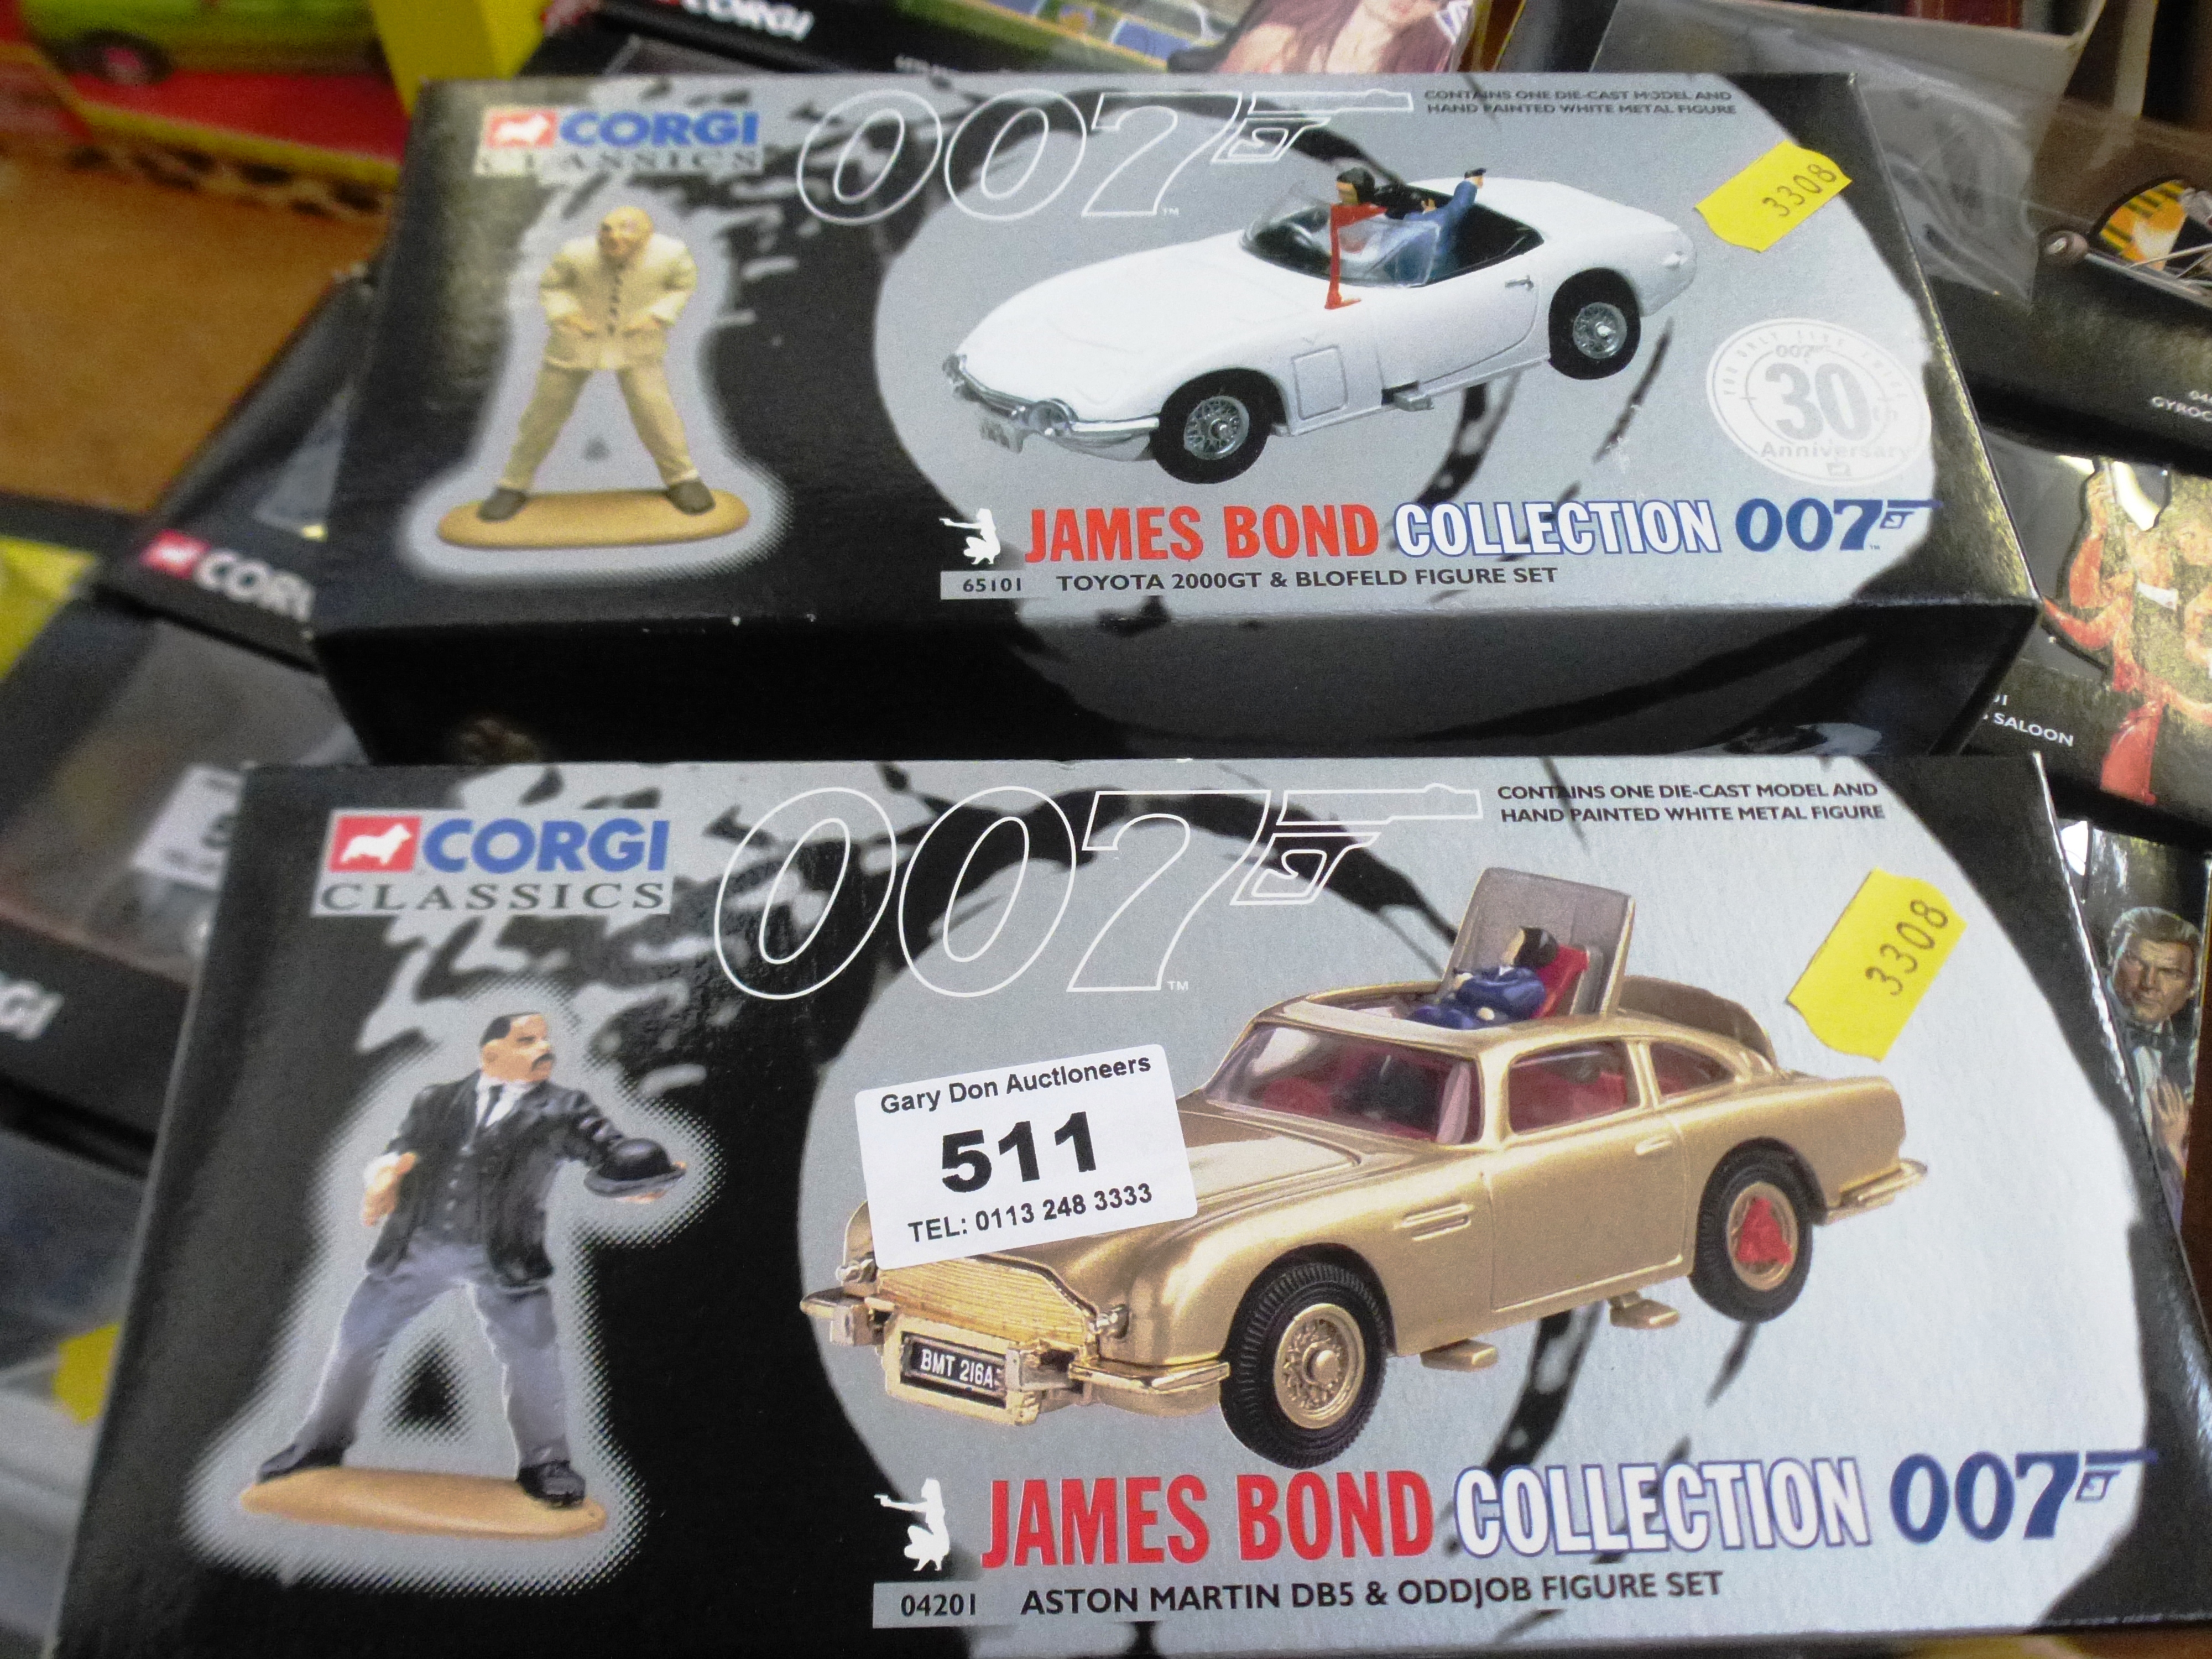 4 BOXED JAMES BOND COLLECTION SETS - 04201, 65101, 65001 AND 65301 - Image 4 of 9